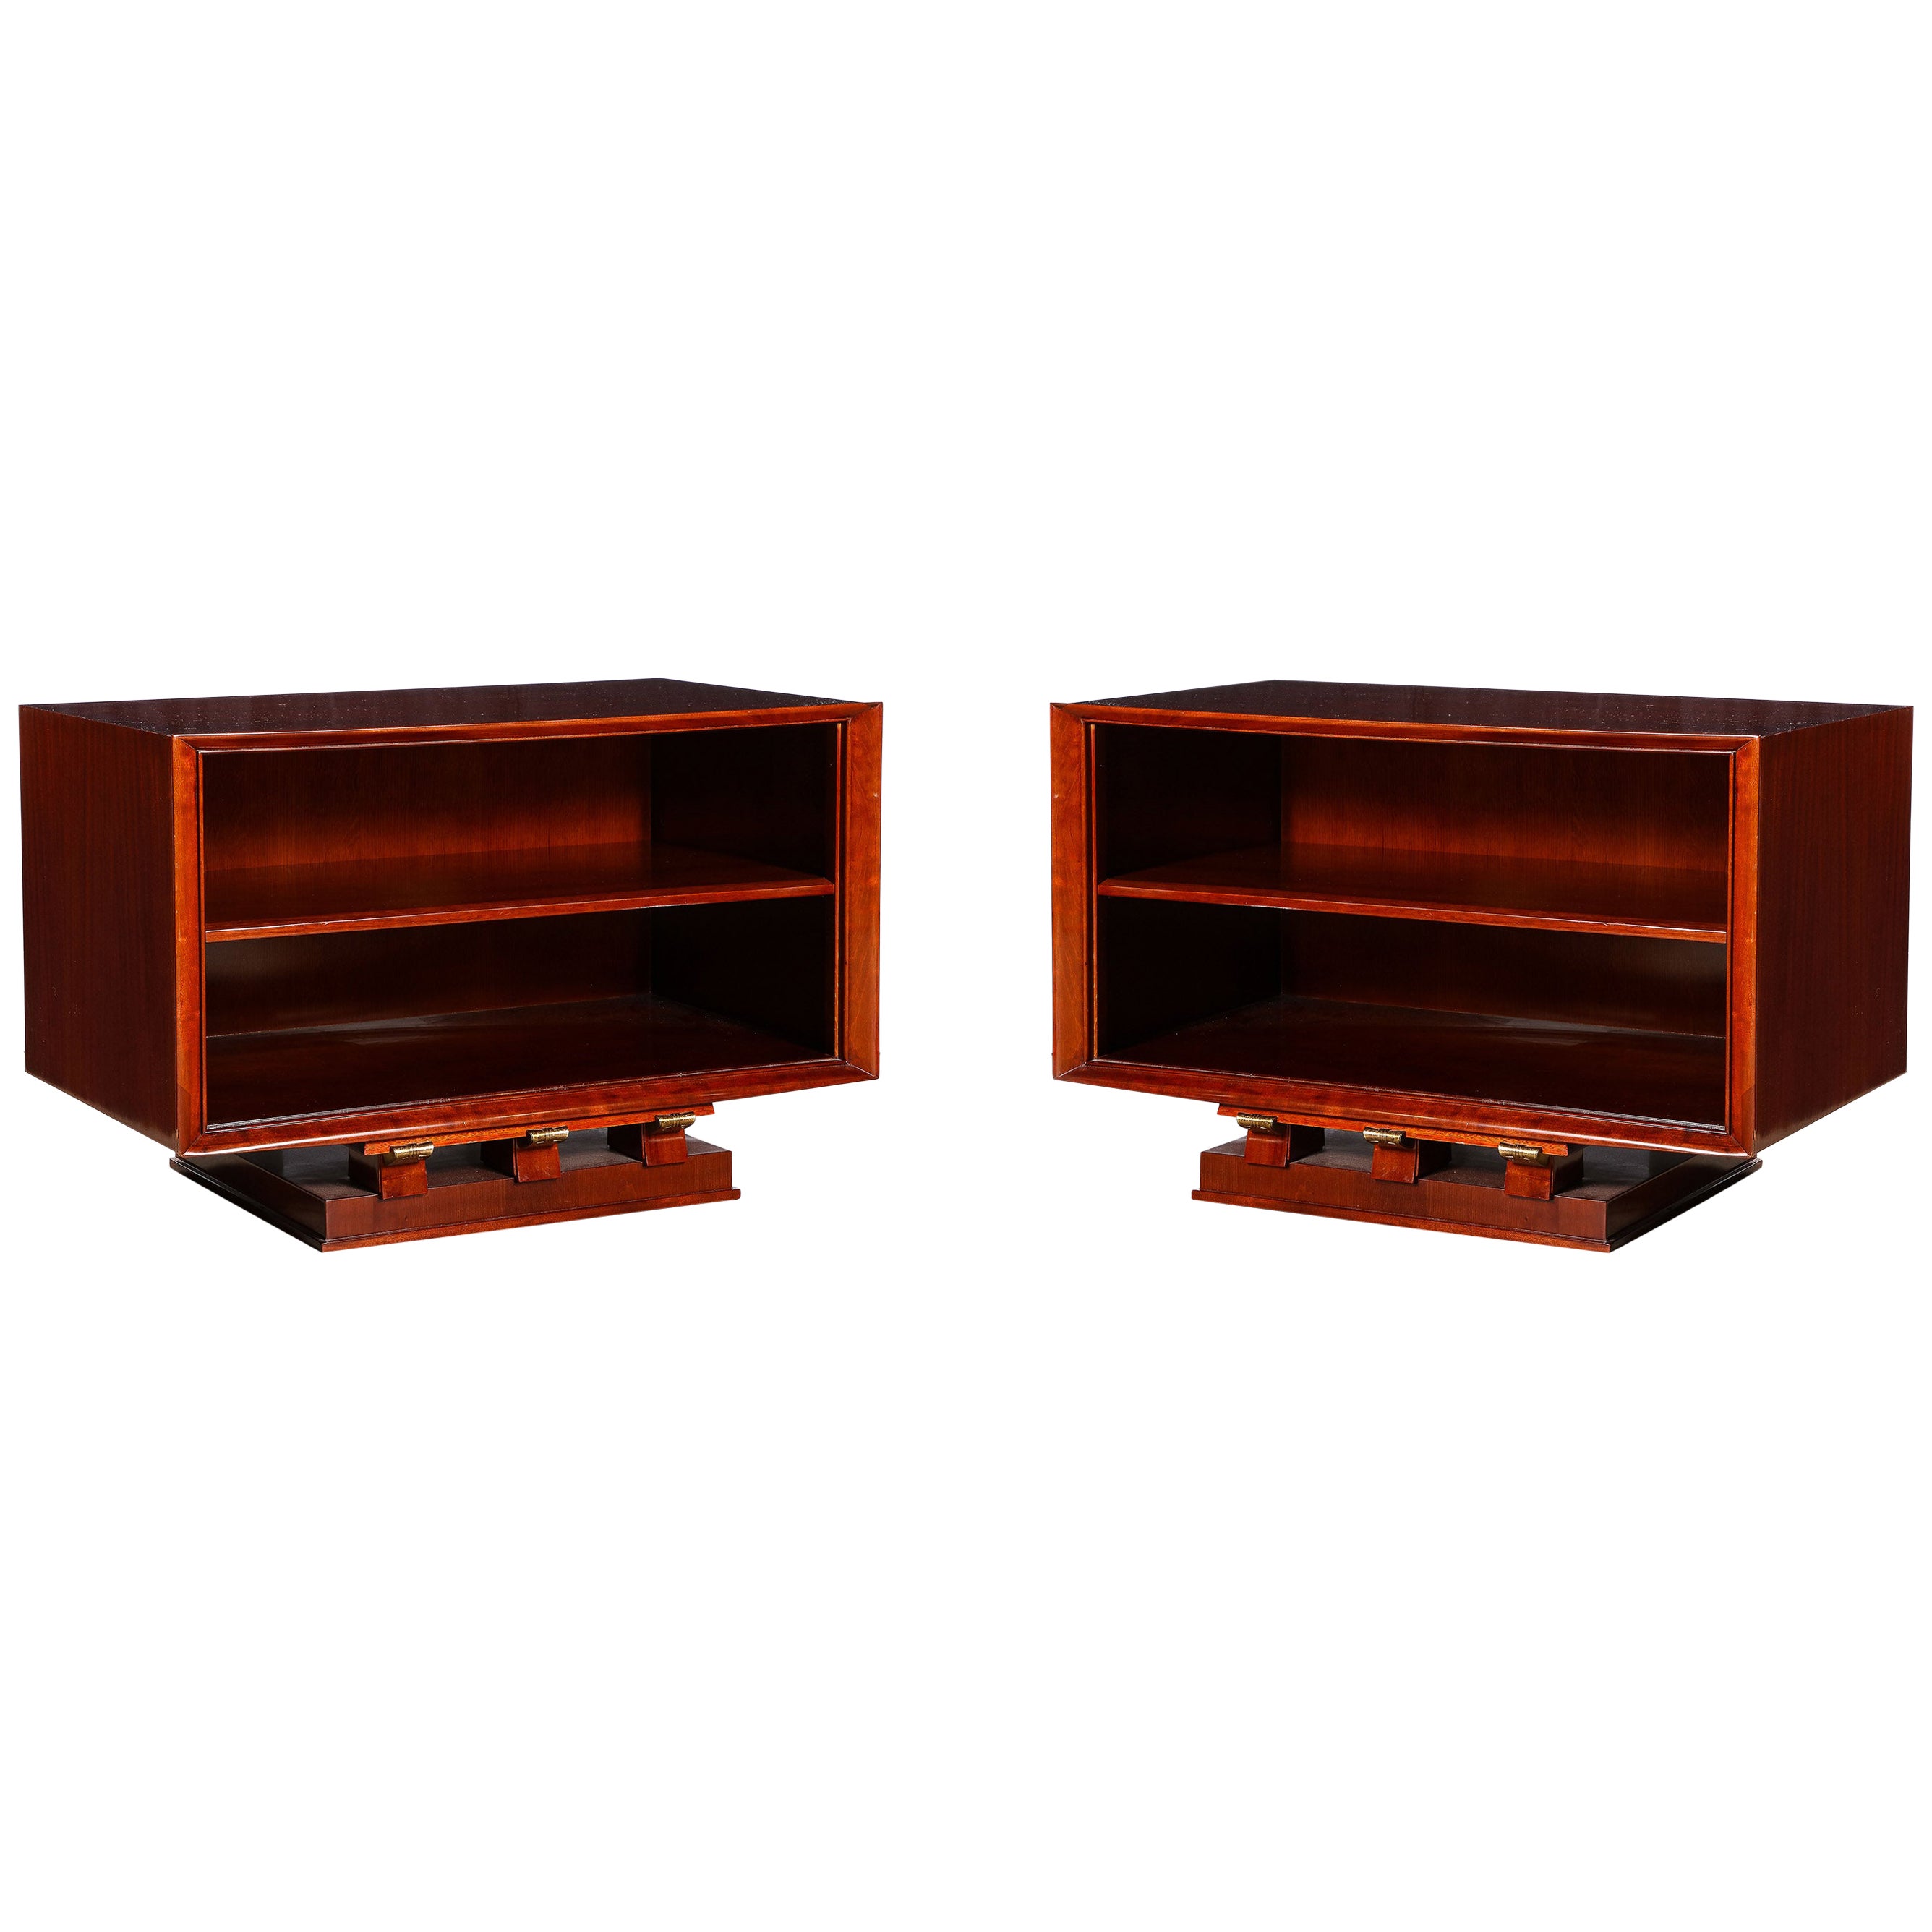 Pair of End Tables by Maxime Old